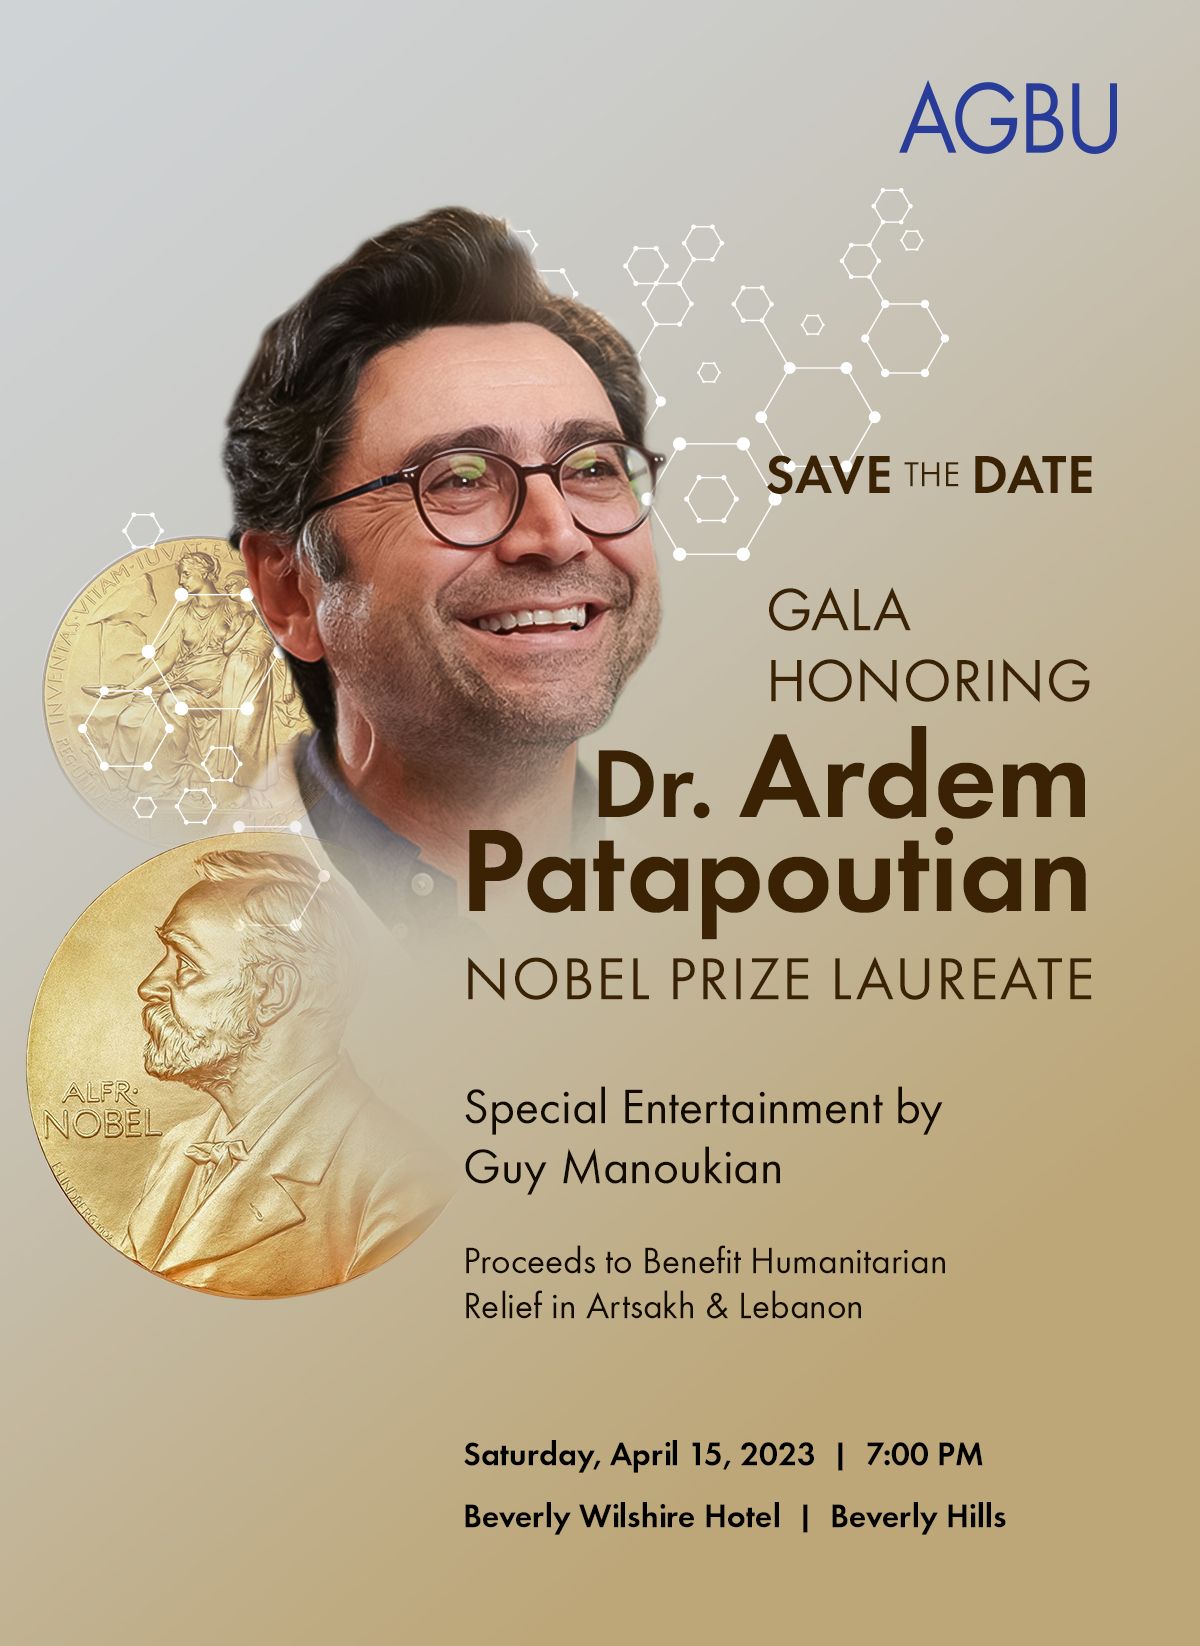 Gala Honoring Dr. Ardem Patapoutian